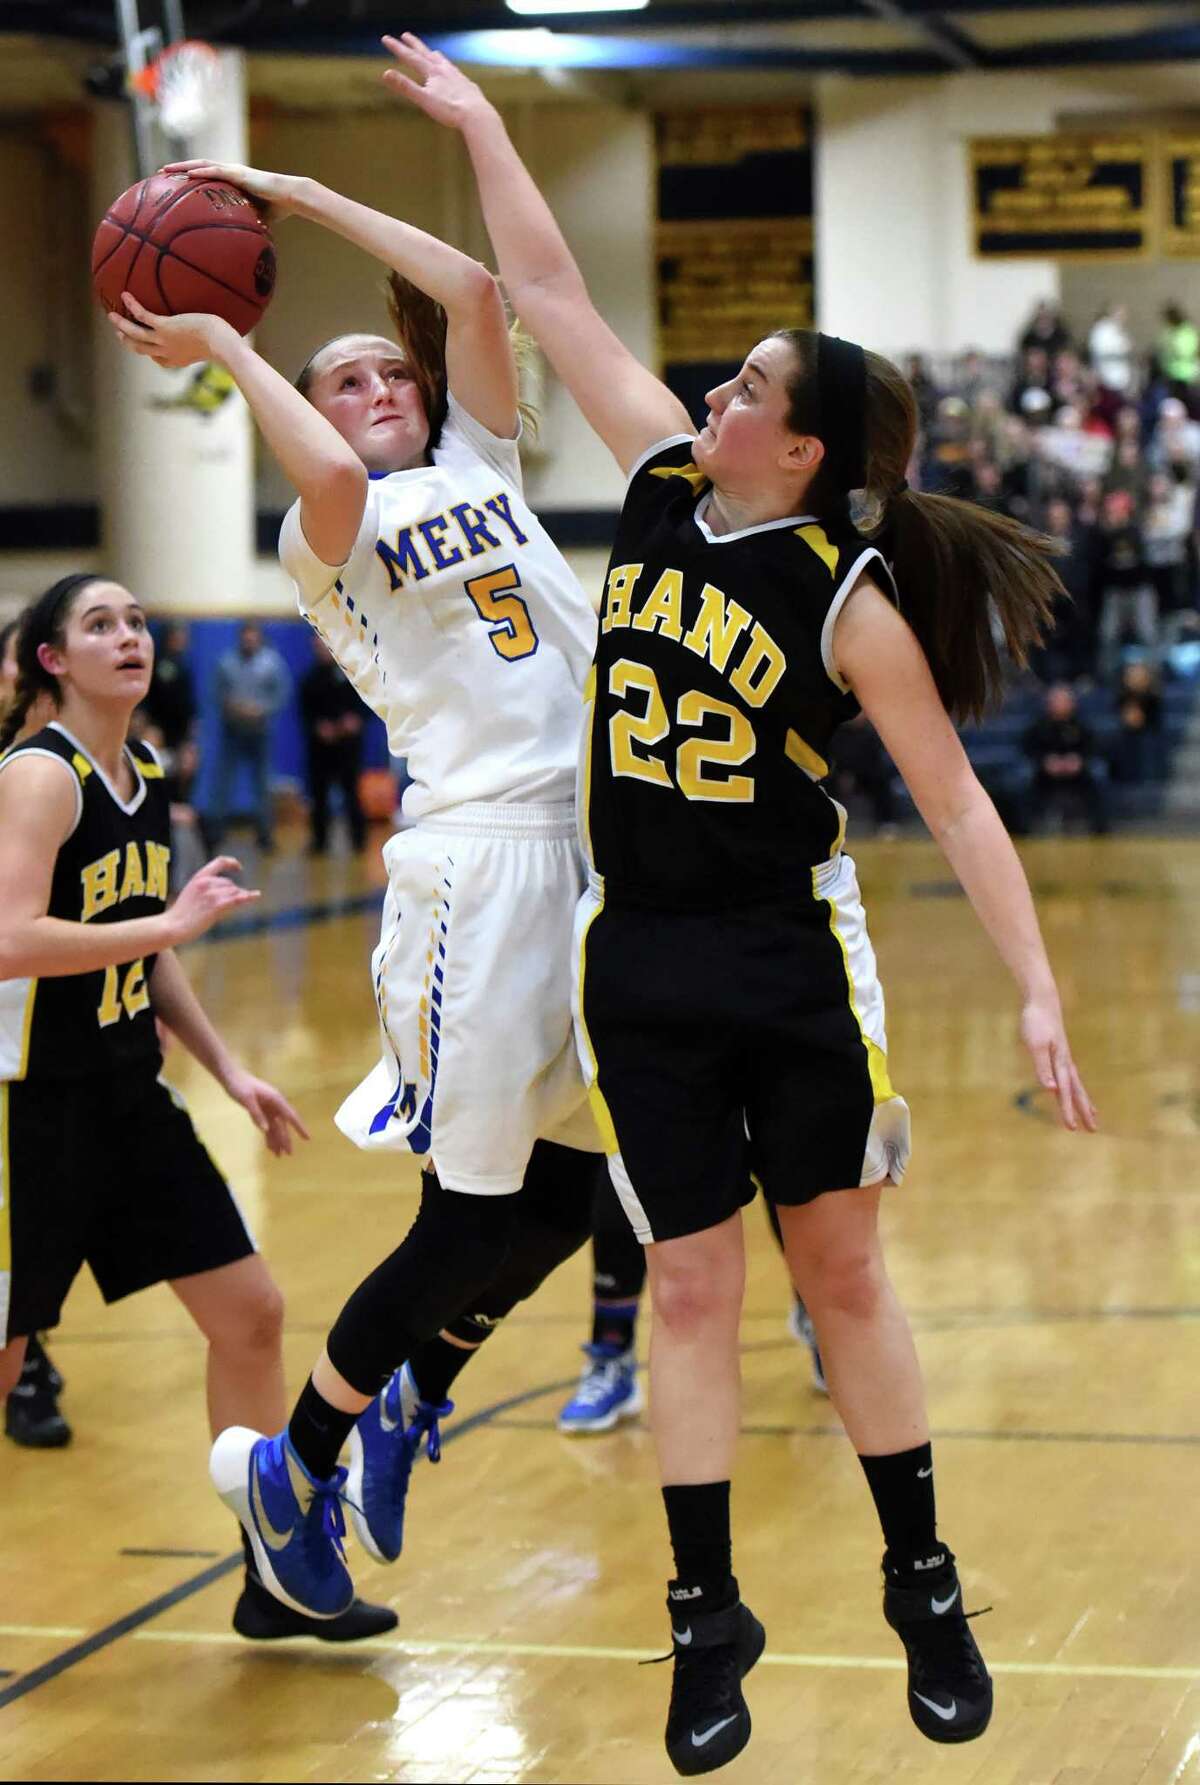 Isabella Santoro of Mercy High School has her shot blocked by Paula Materin of Hand H.S. during the fourth guarter of the SCC girls basketball championship at East Haven High School Tuesday evening, February 23, 2016. (Peter Hvizdak – New Haven Register)